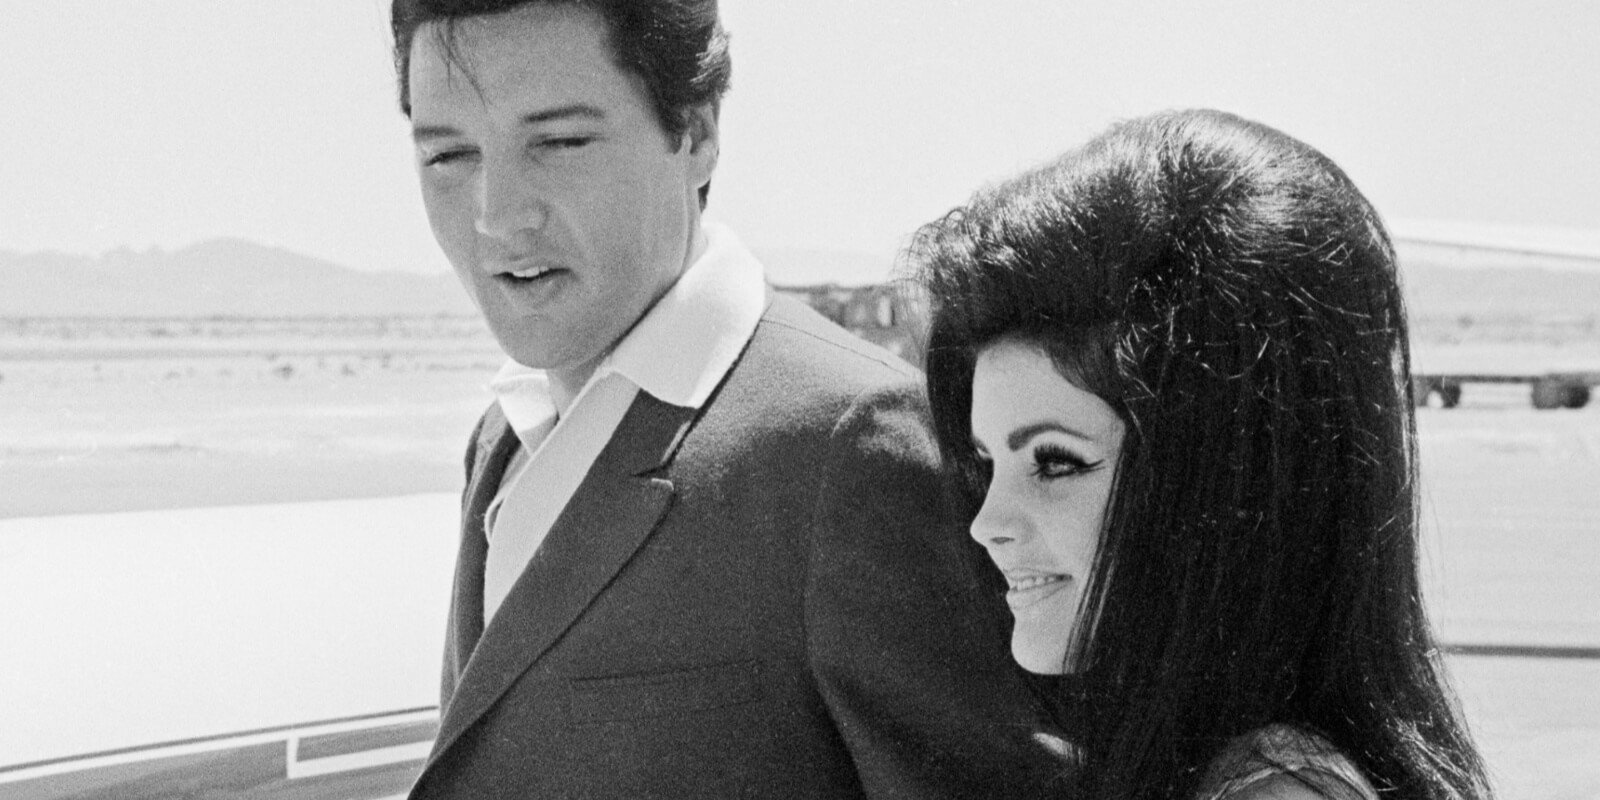 Elvis Presley and Priscilla Presley photographed after their marriage at the Aladdin Hotel in 1967.